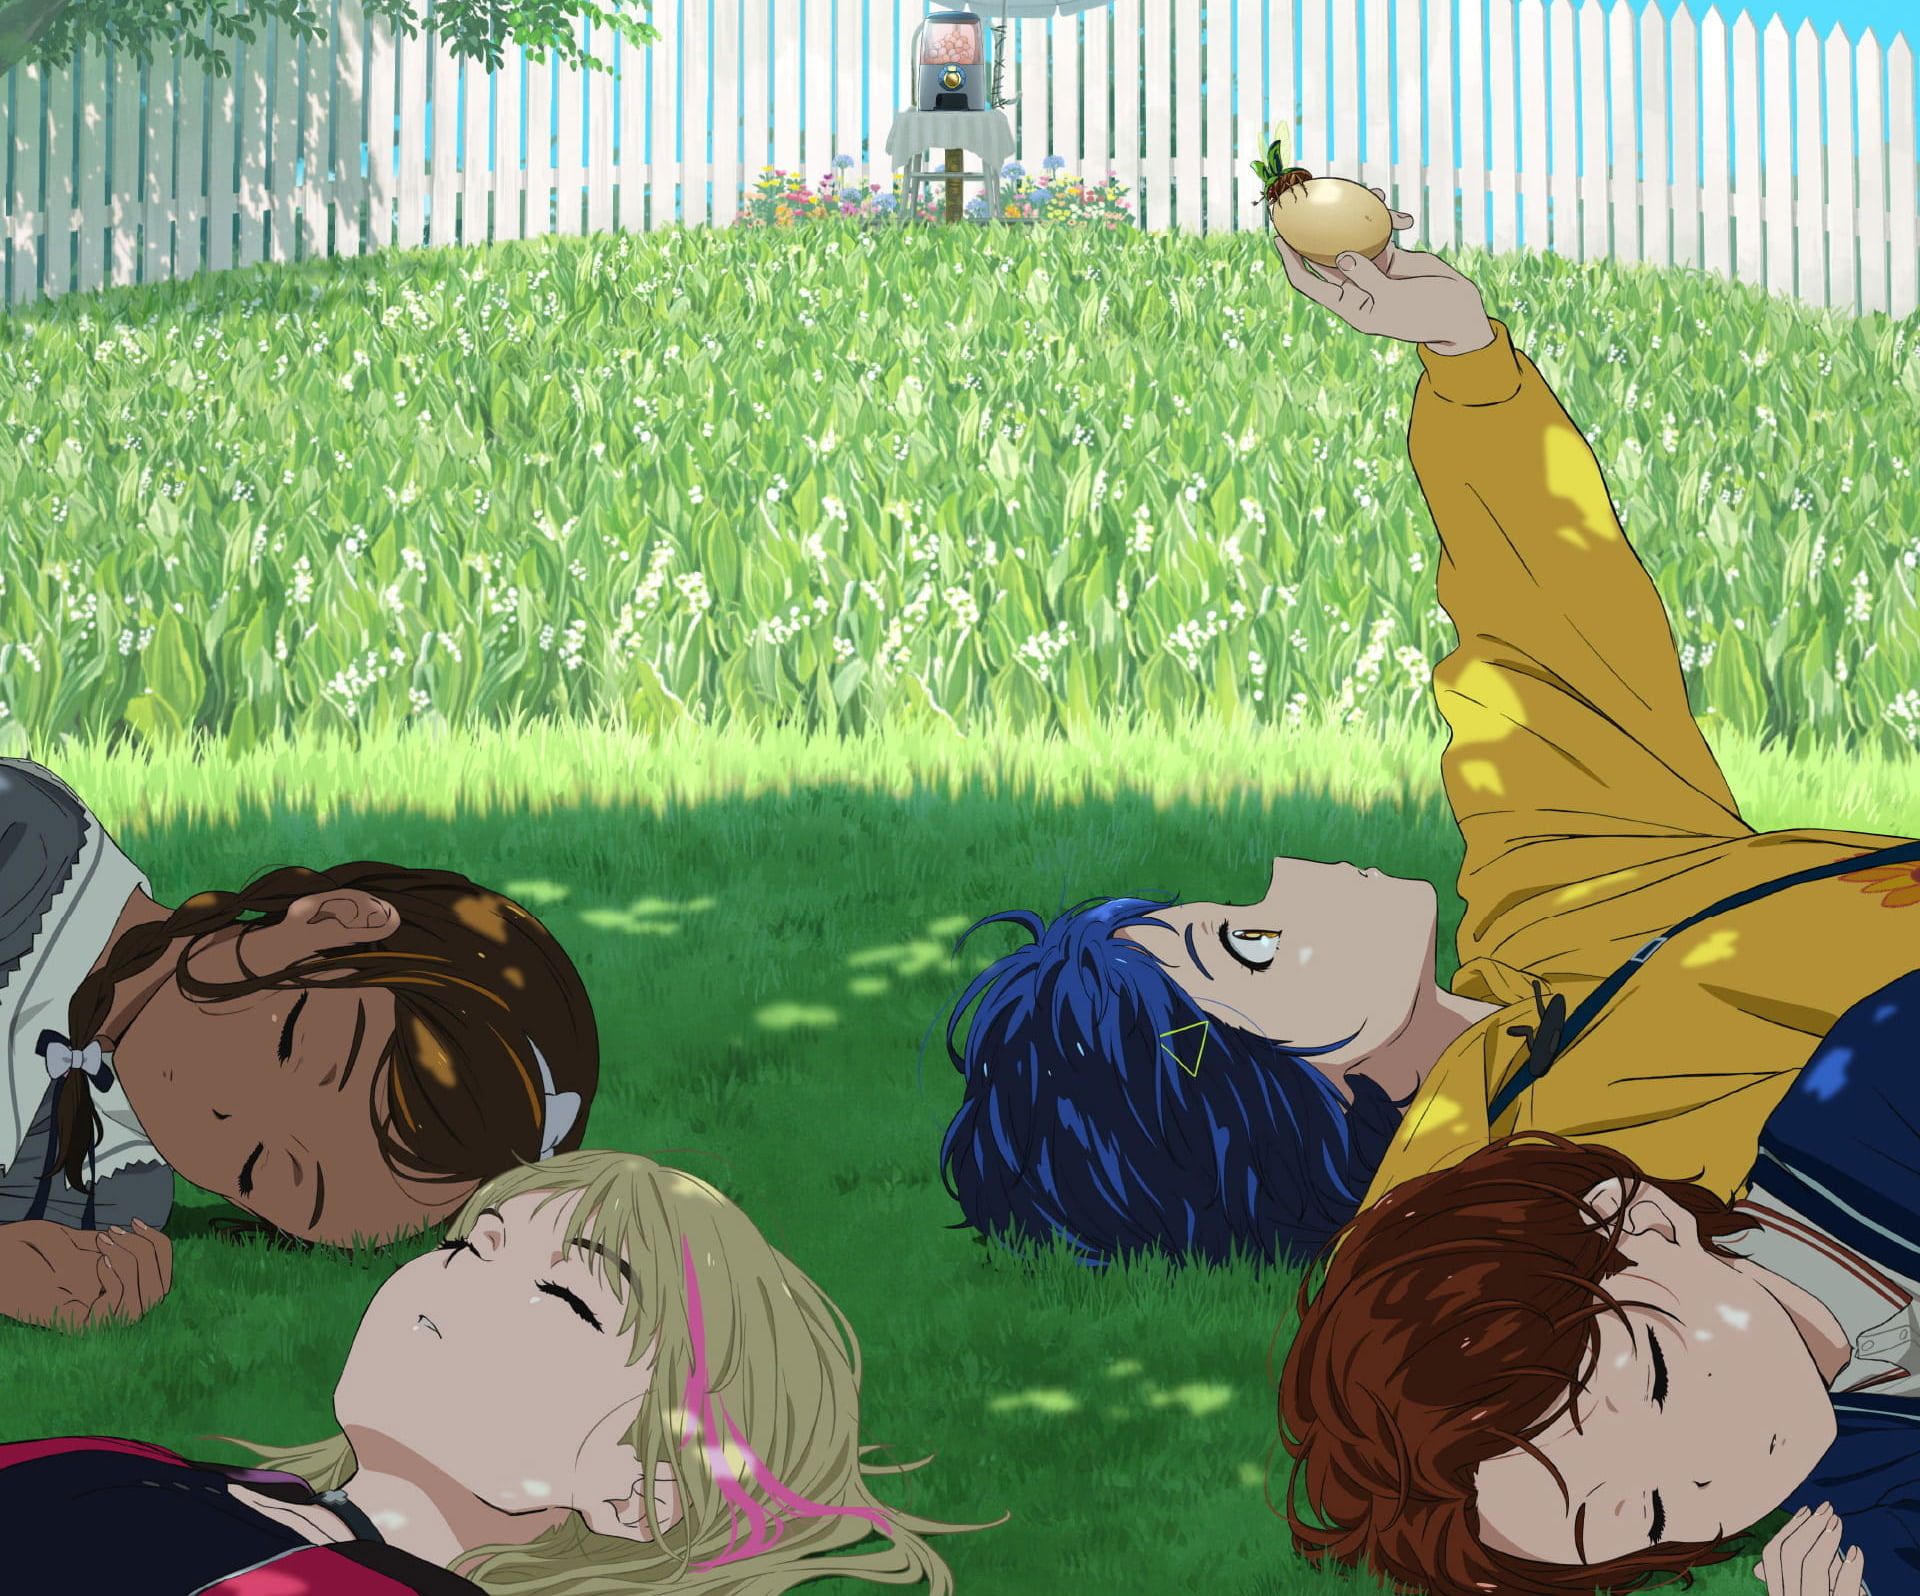 A group of people laying in the grass - Egg